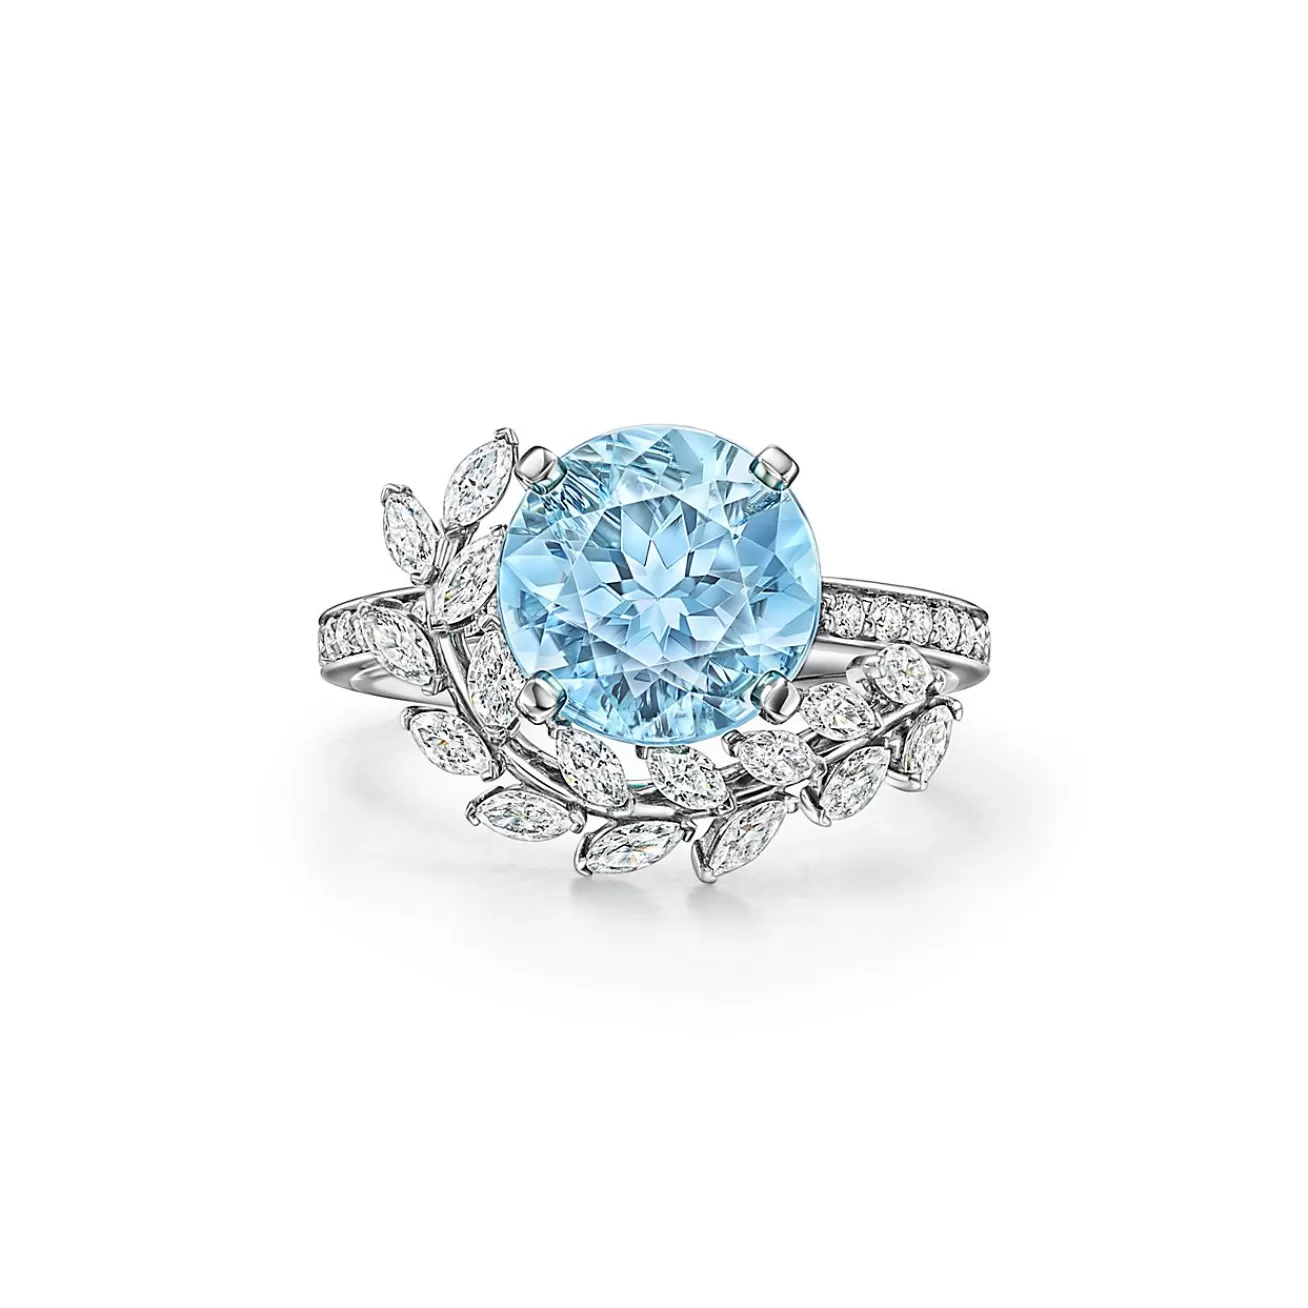 Tiffany & Co. Tiffany Victoria® Vine Ring in Platinum with an Aquamarine and Diamonds | ^ Rings | Platinum Jewelry